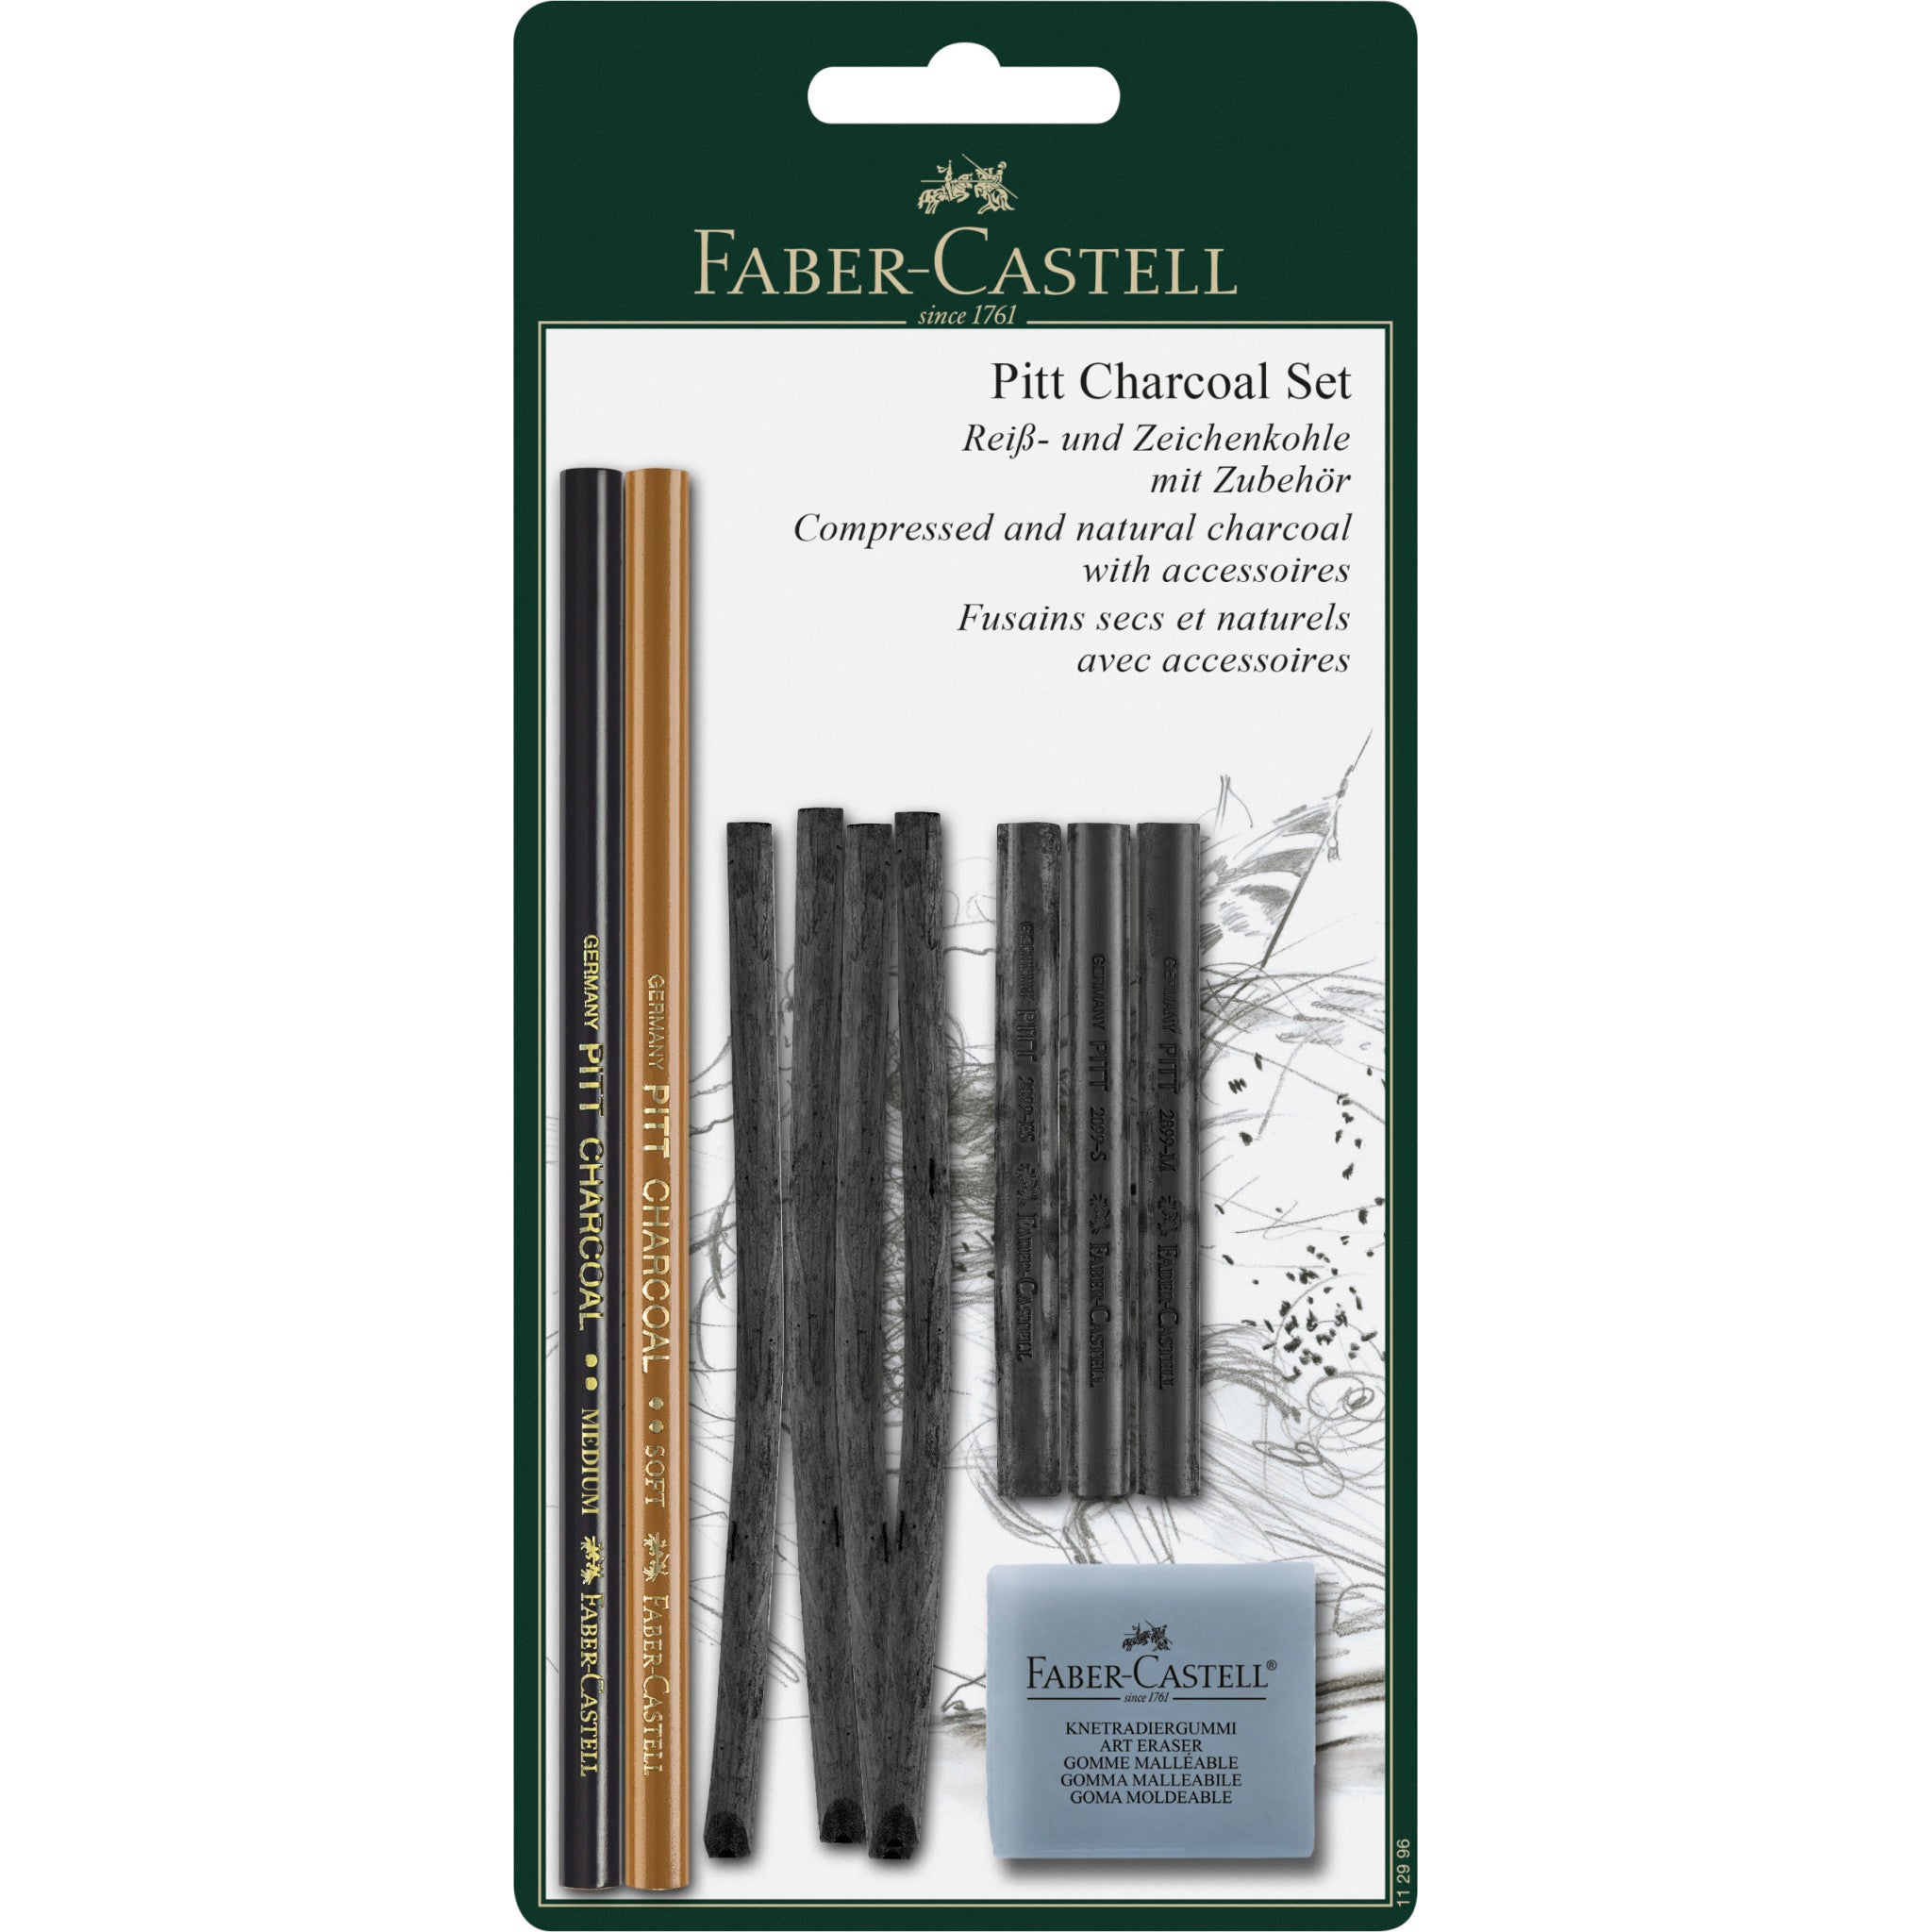 How to Sharpen Charcoal Pencils - Faber-Castell 